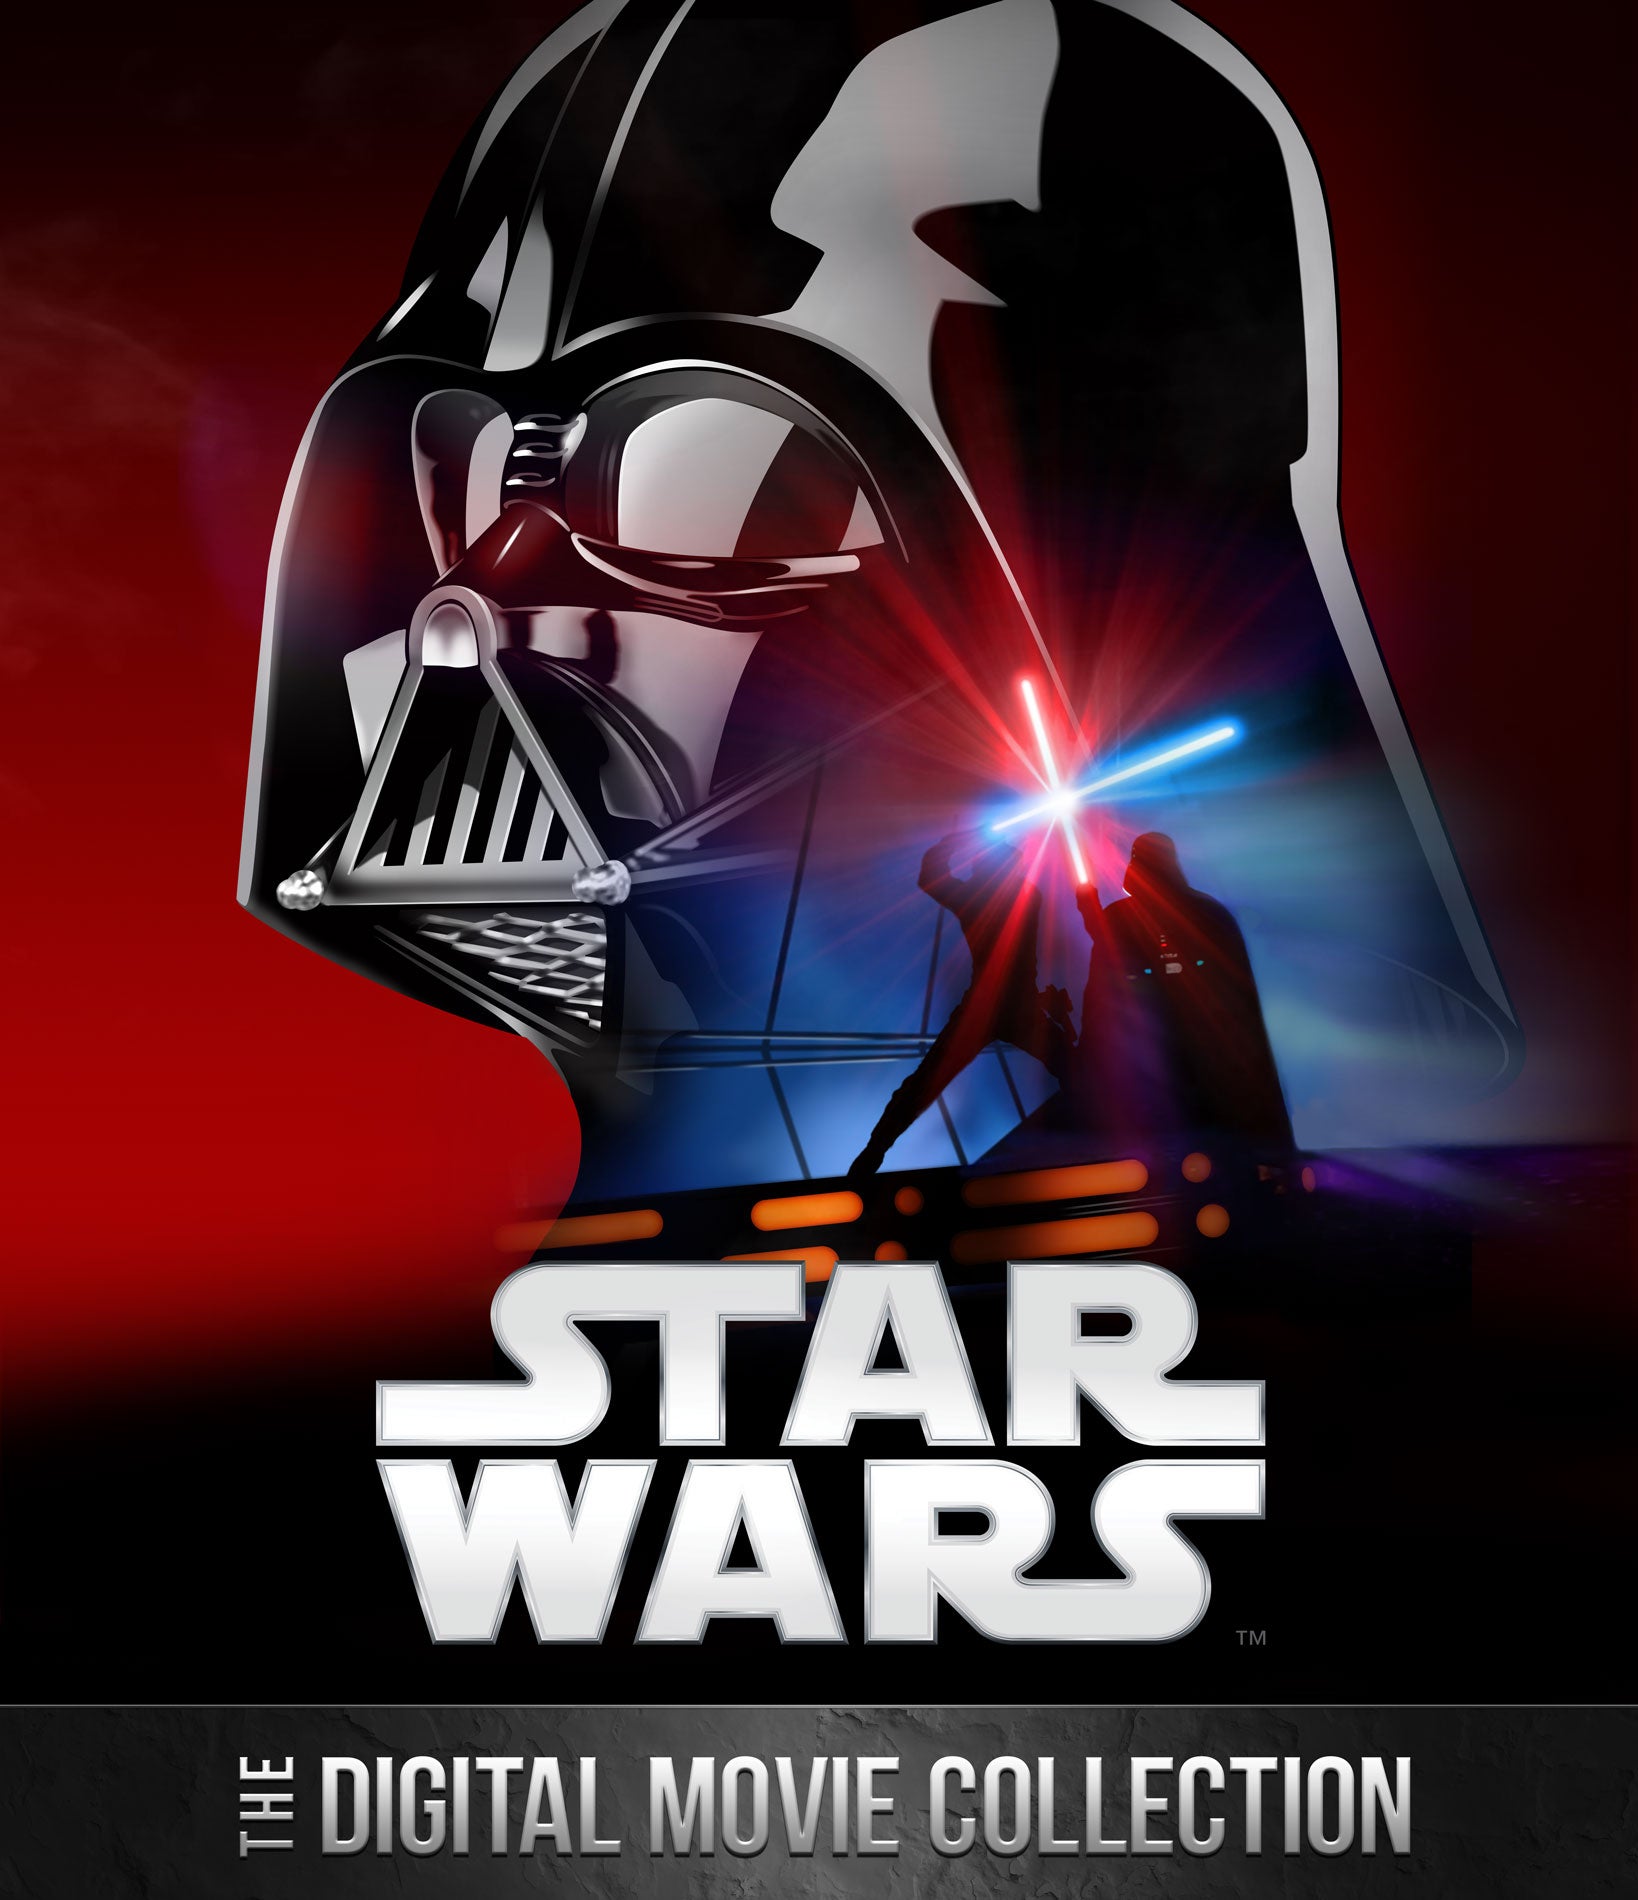 Image for Star Wars digital HD collection to launch through Xbox Video on April 10 